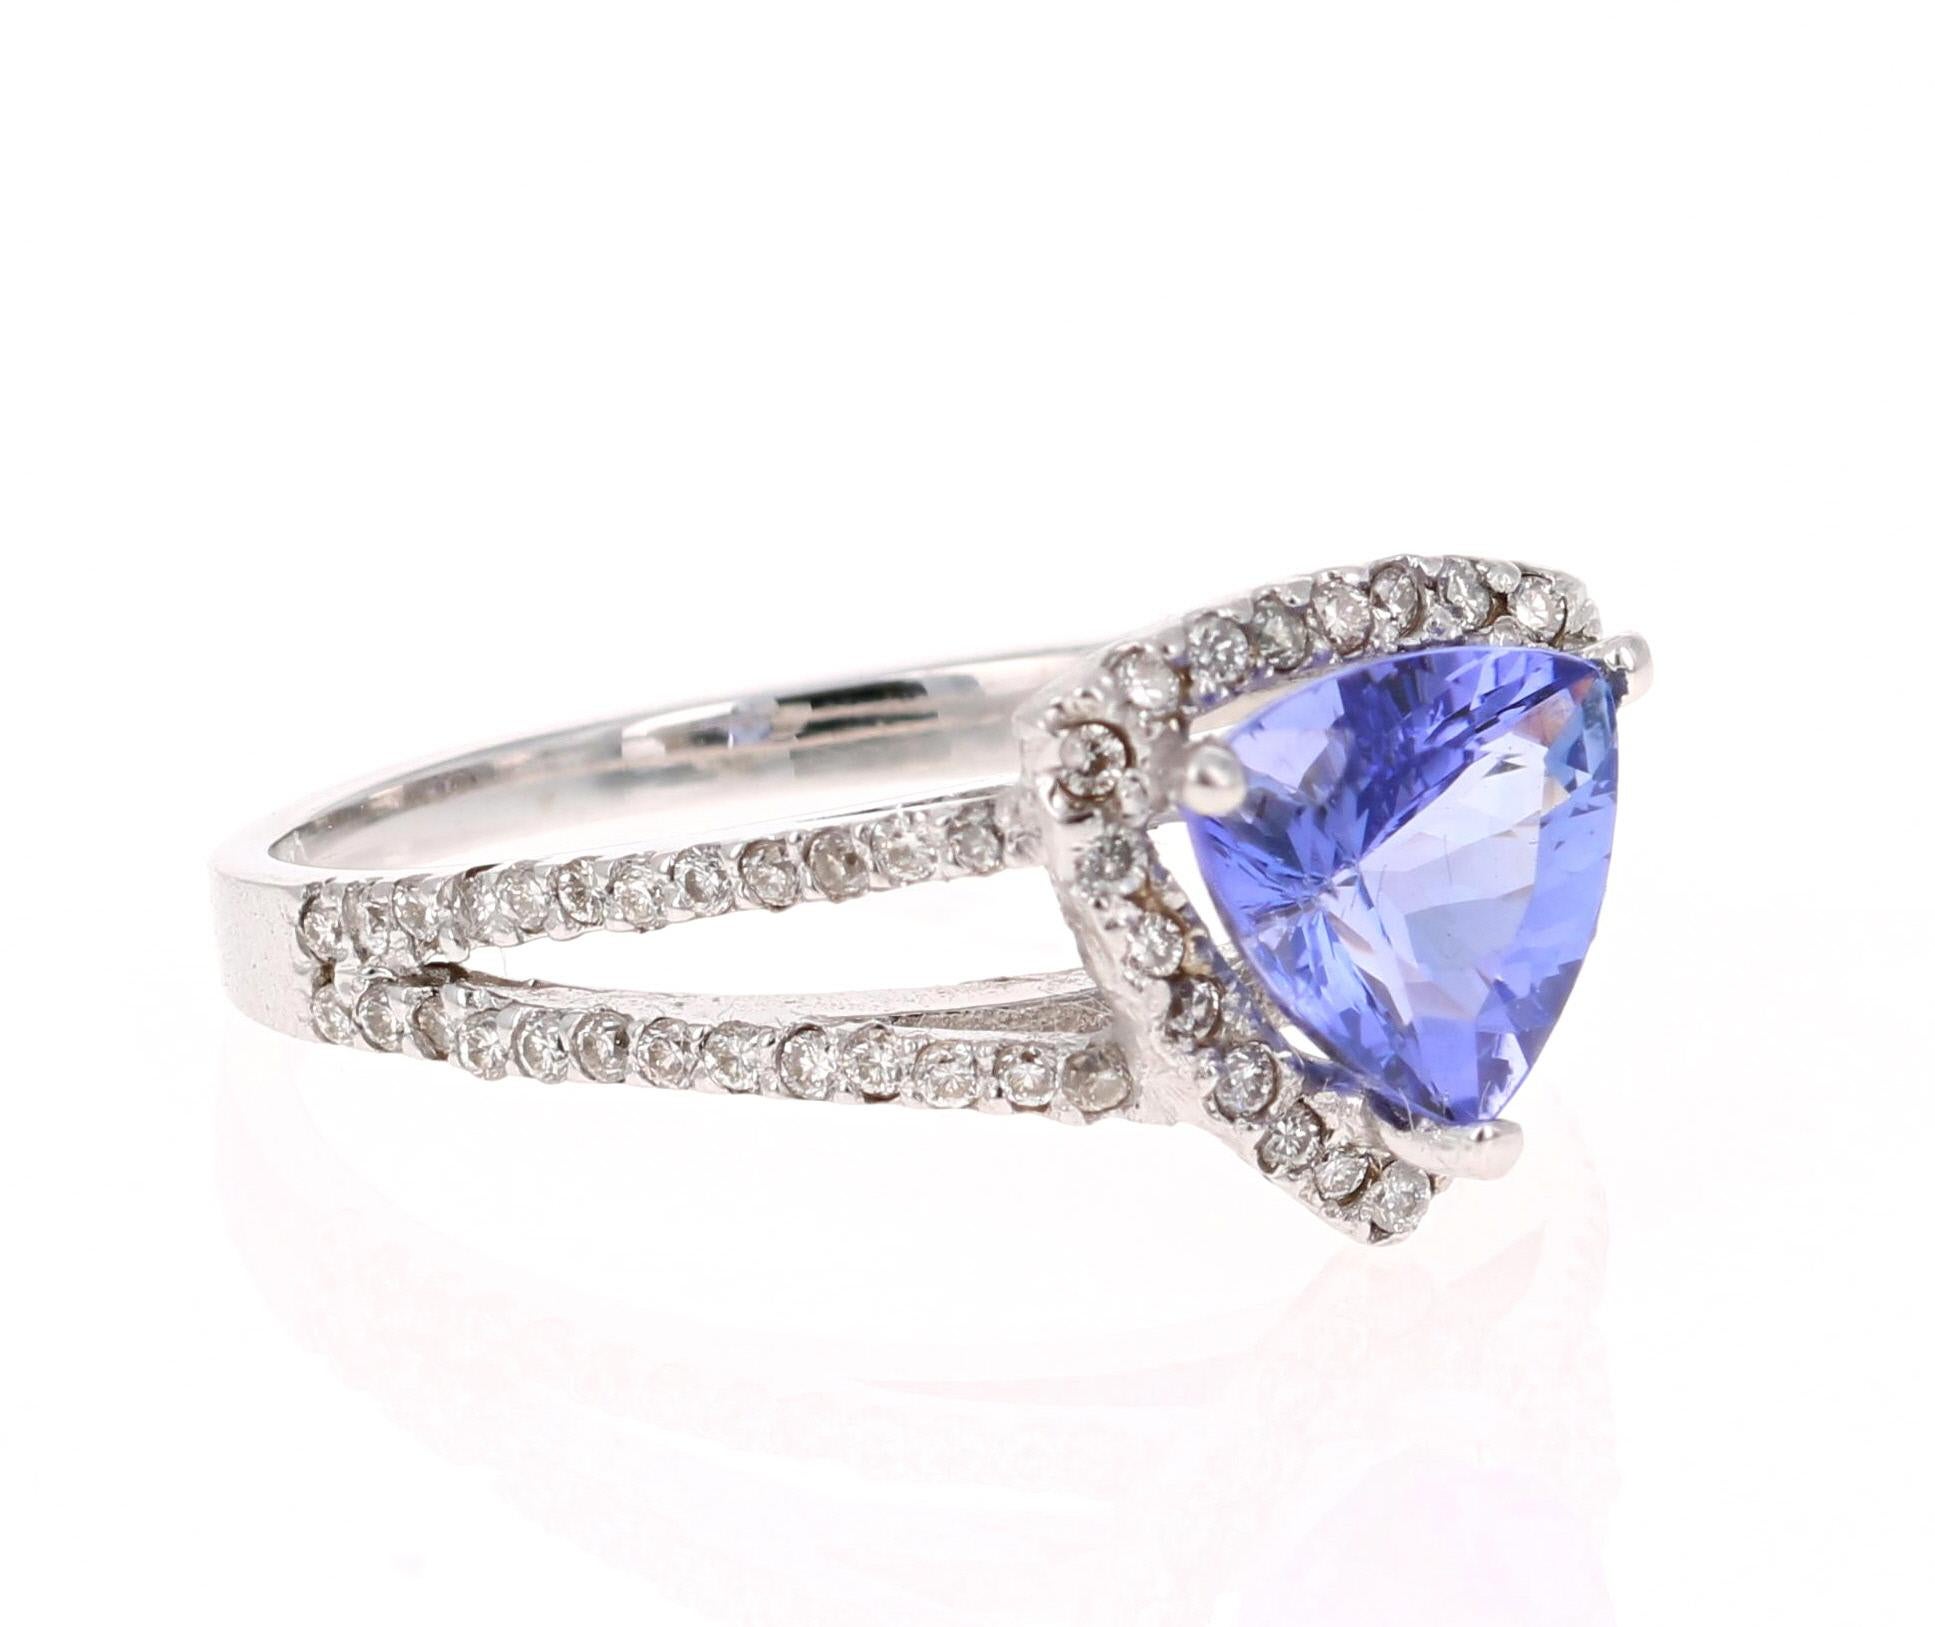 This cute ring has a 1.22 Carat Trillion Cut Tanzanite that is set in the center of the ring. The Tanzanite is surrounded by a halo of 79 Round Cut Diamonds that weigh 0.37 carats. The Total Carat Weight of the ring is 1.59 Carats. 

The ring is